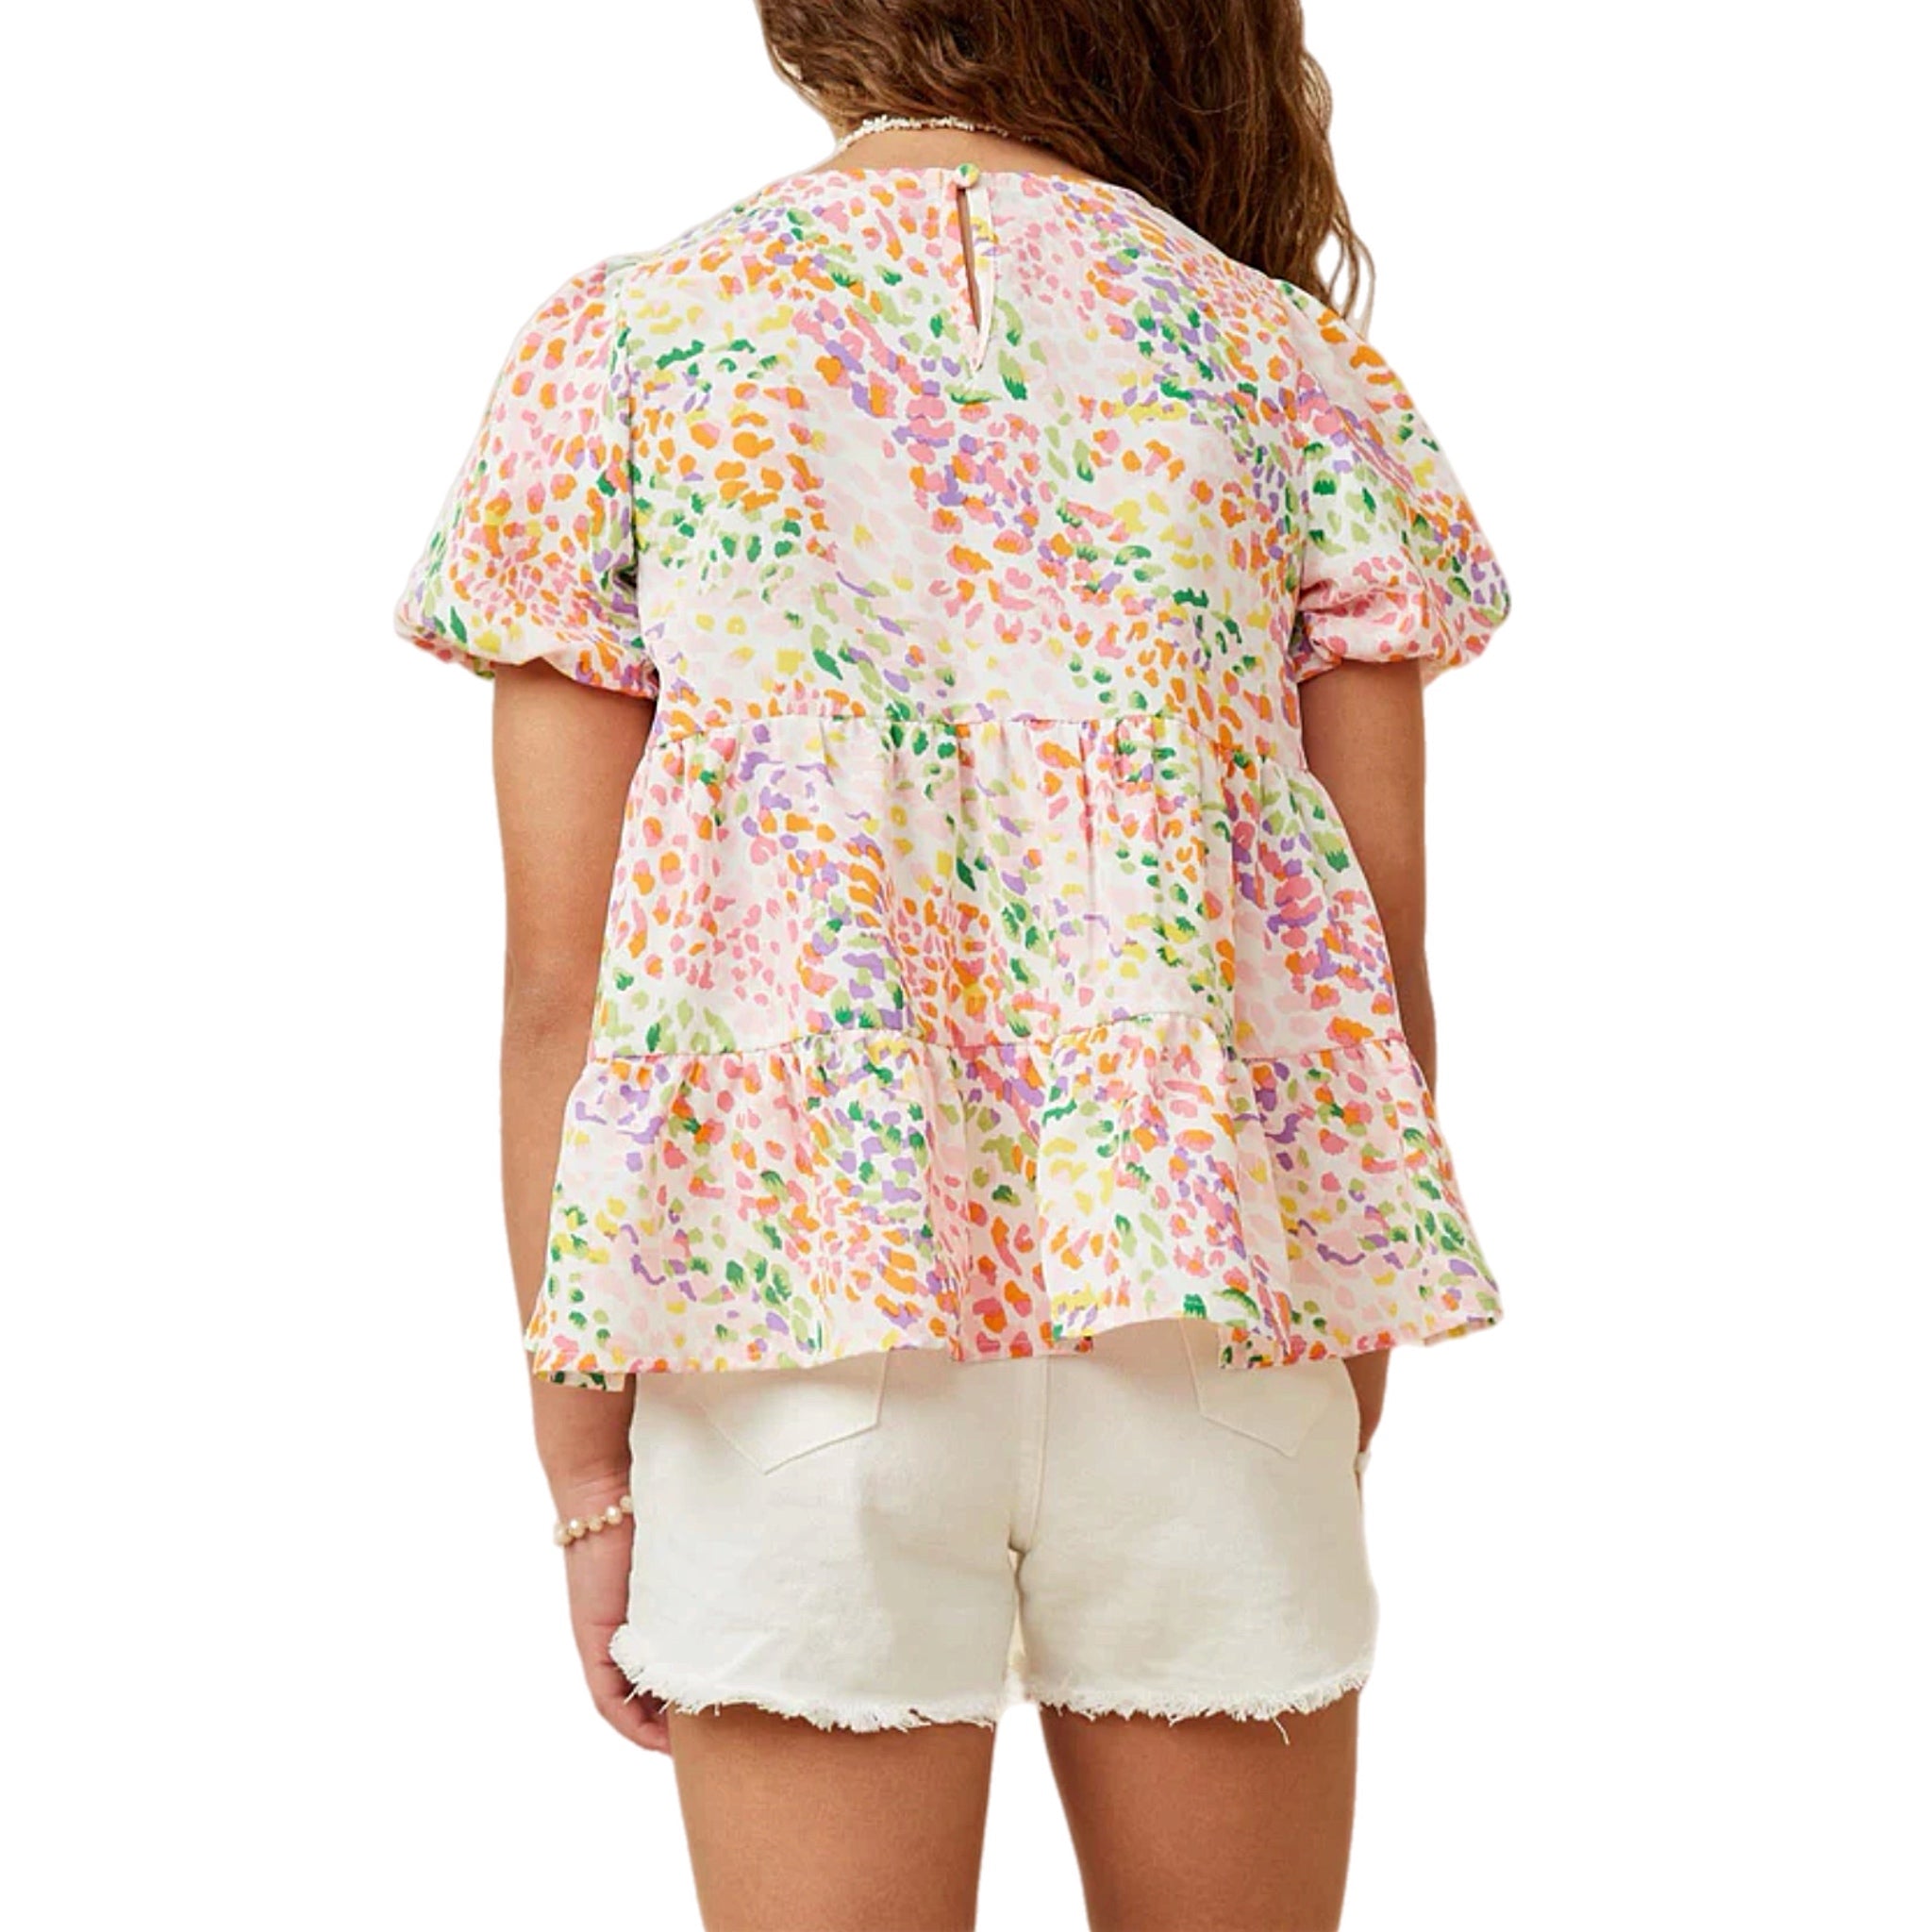 ABSTRACT MULTI COLOR DOT TOP - PINK MIX